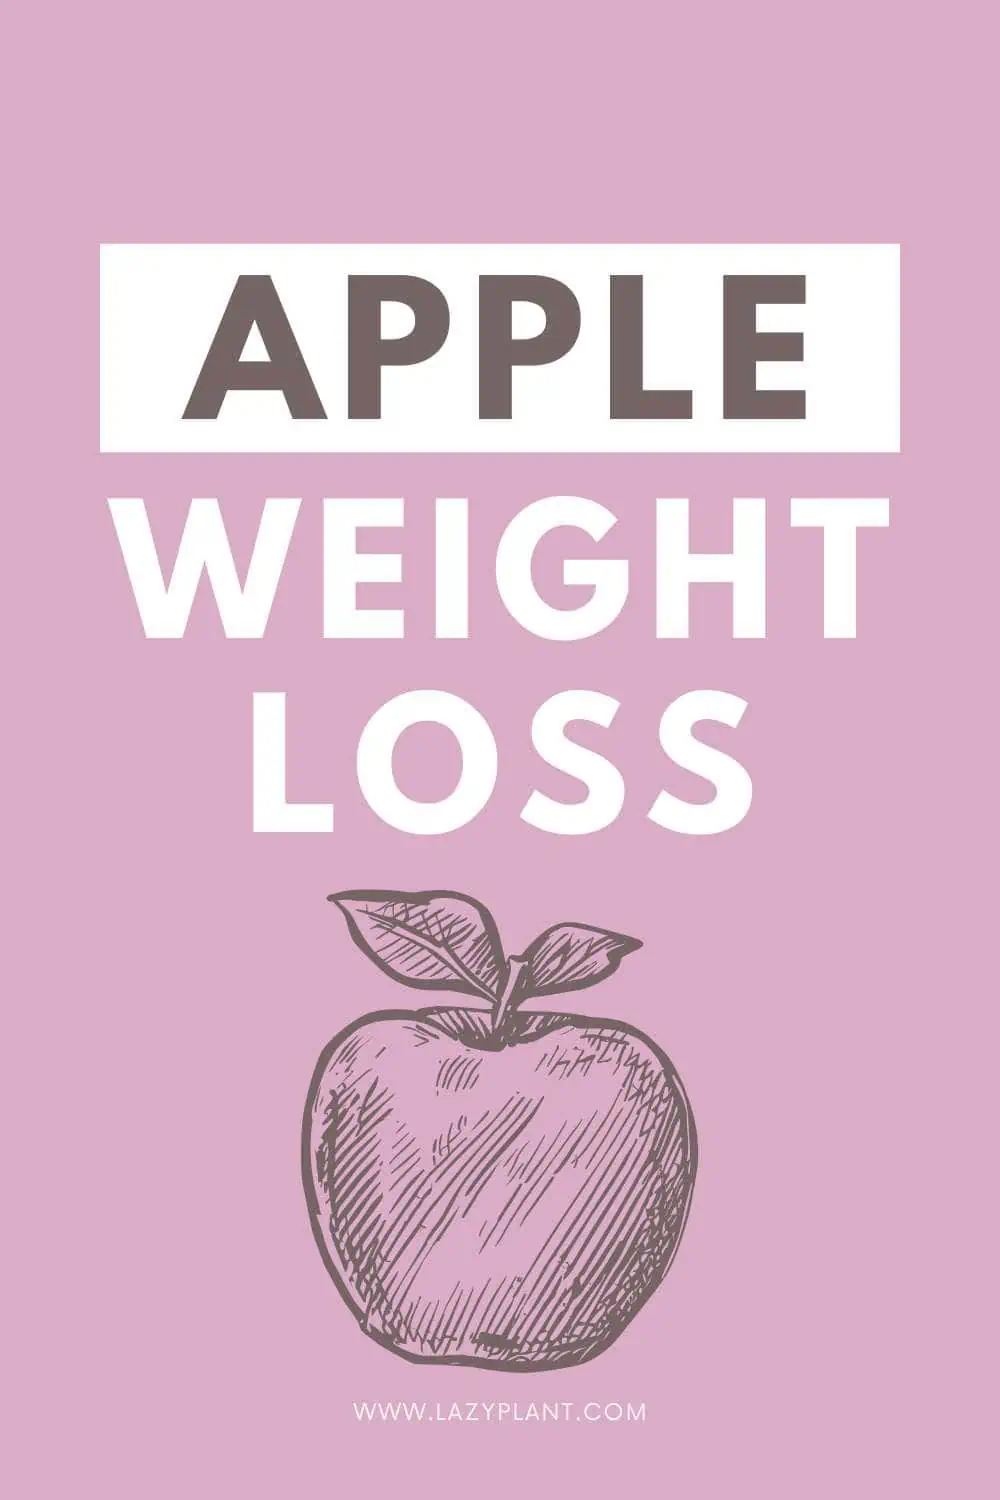 Eat an Apple a day for Weight Loss